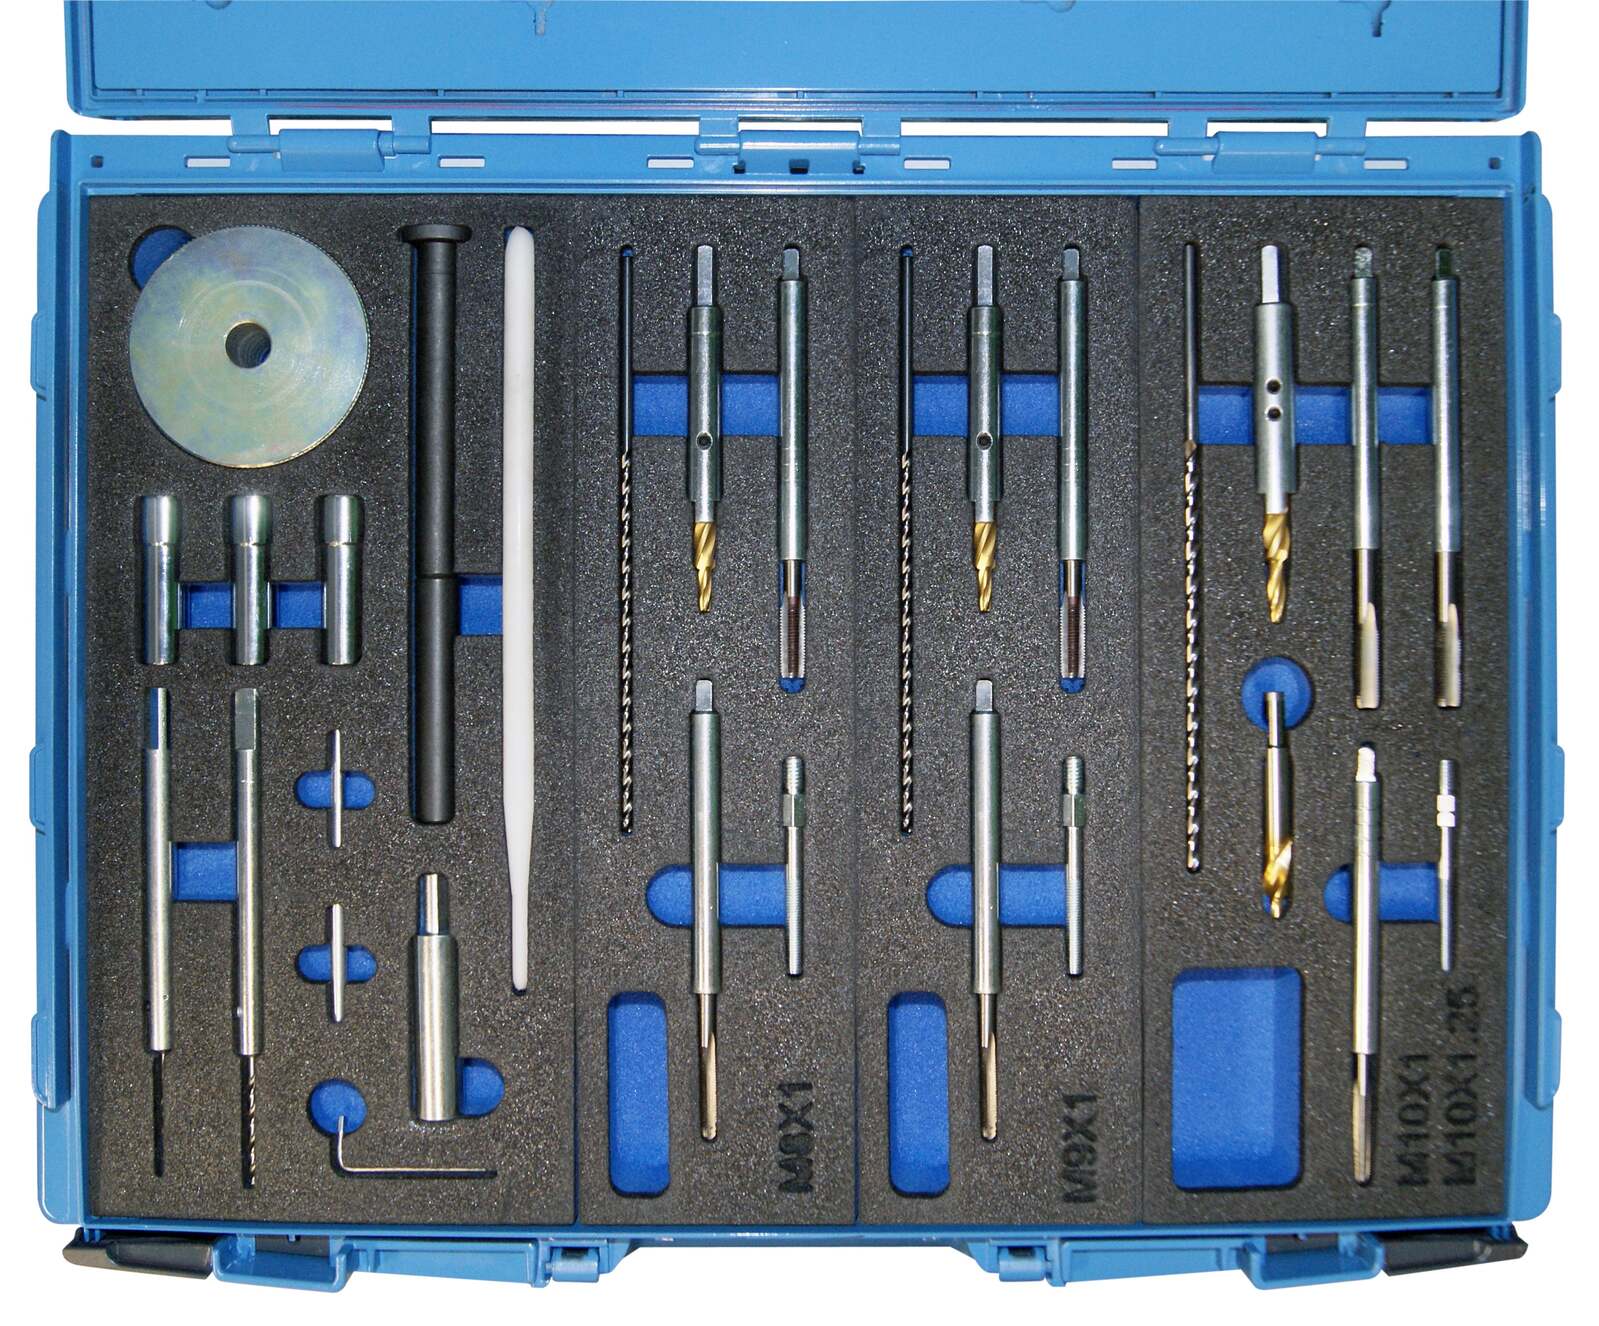 Glow plug complete set for removing broken glow plugs - govoni